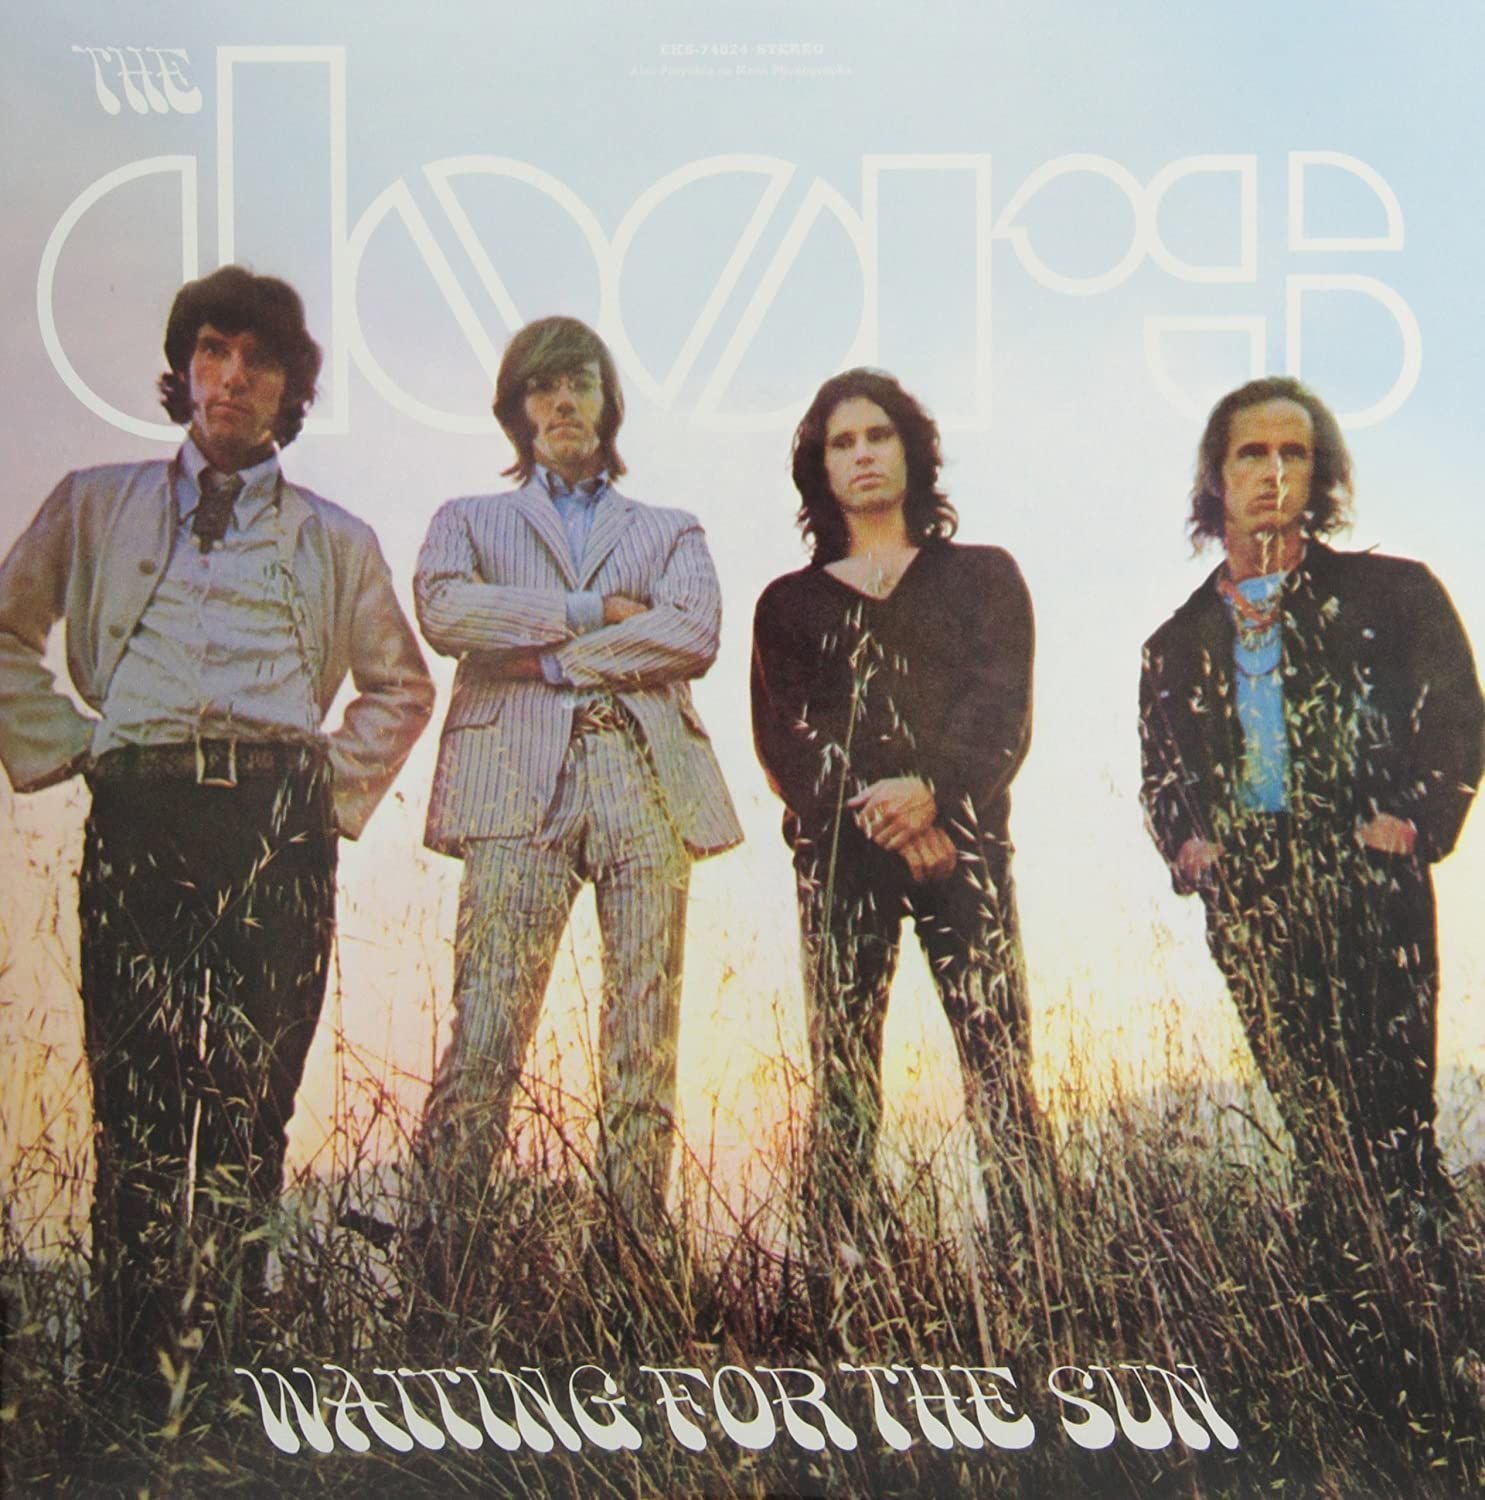 Disco in vinile The Doors - Waiting For The Sun (LP)